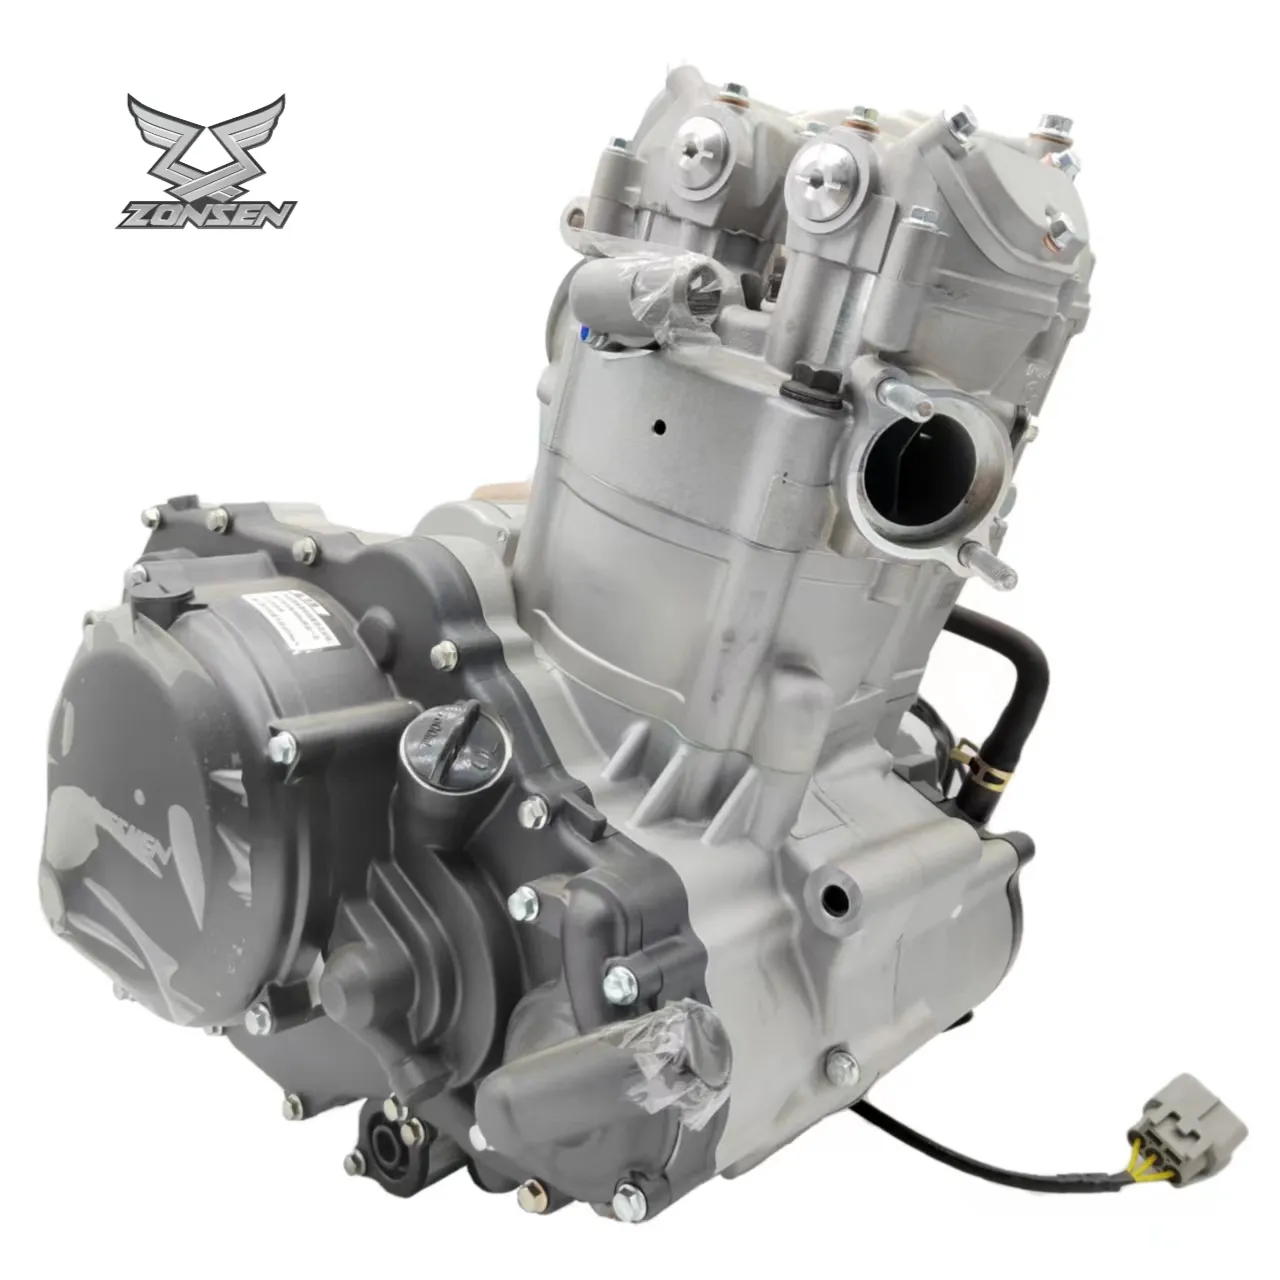 OEM Customize NC450 Sport 400cc Motorcycle Travel Engine Water-cooled Power Machine 4 Stroke Zongshen Electric / Kick 6 Month